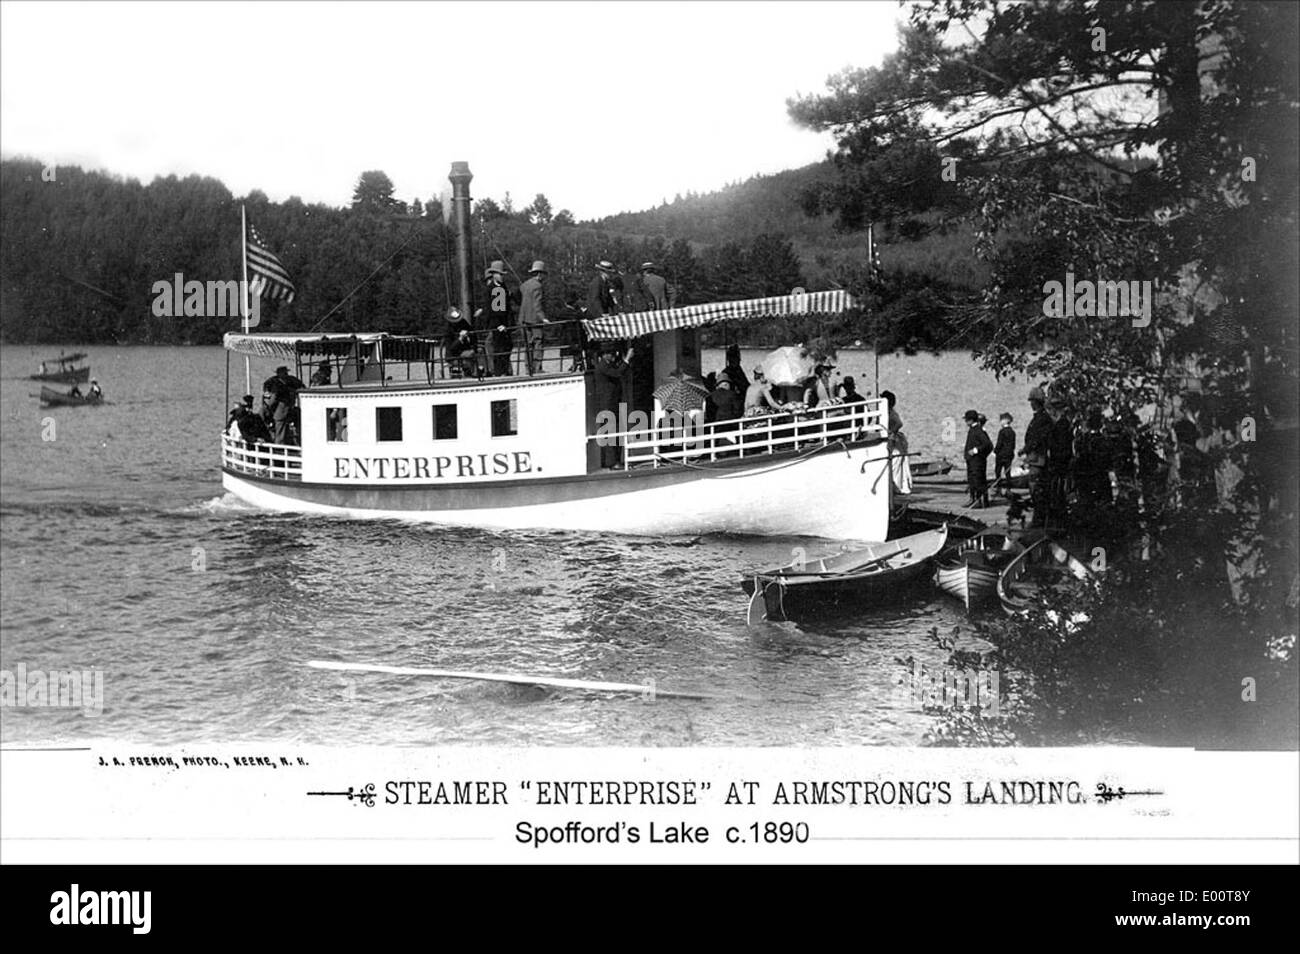 Steamer 'Enterprise' on Spofford Lake, Chesterfield New Hampshire Stock Photo